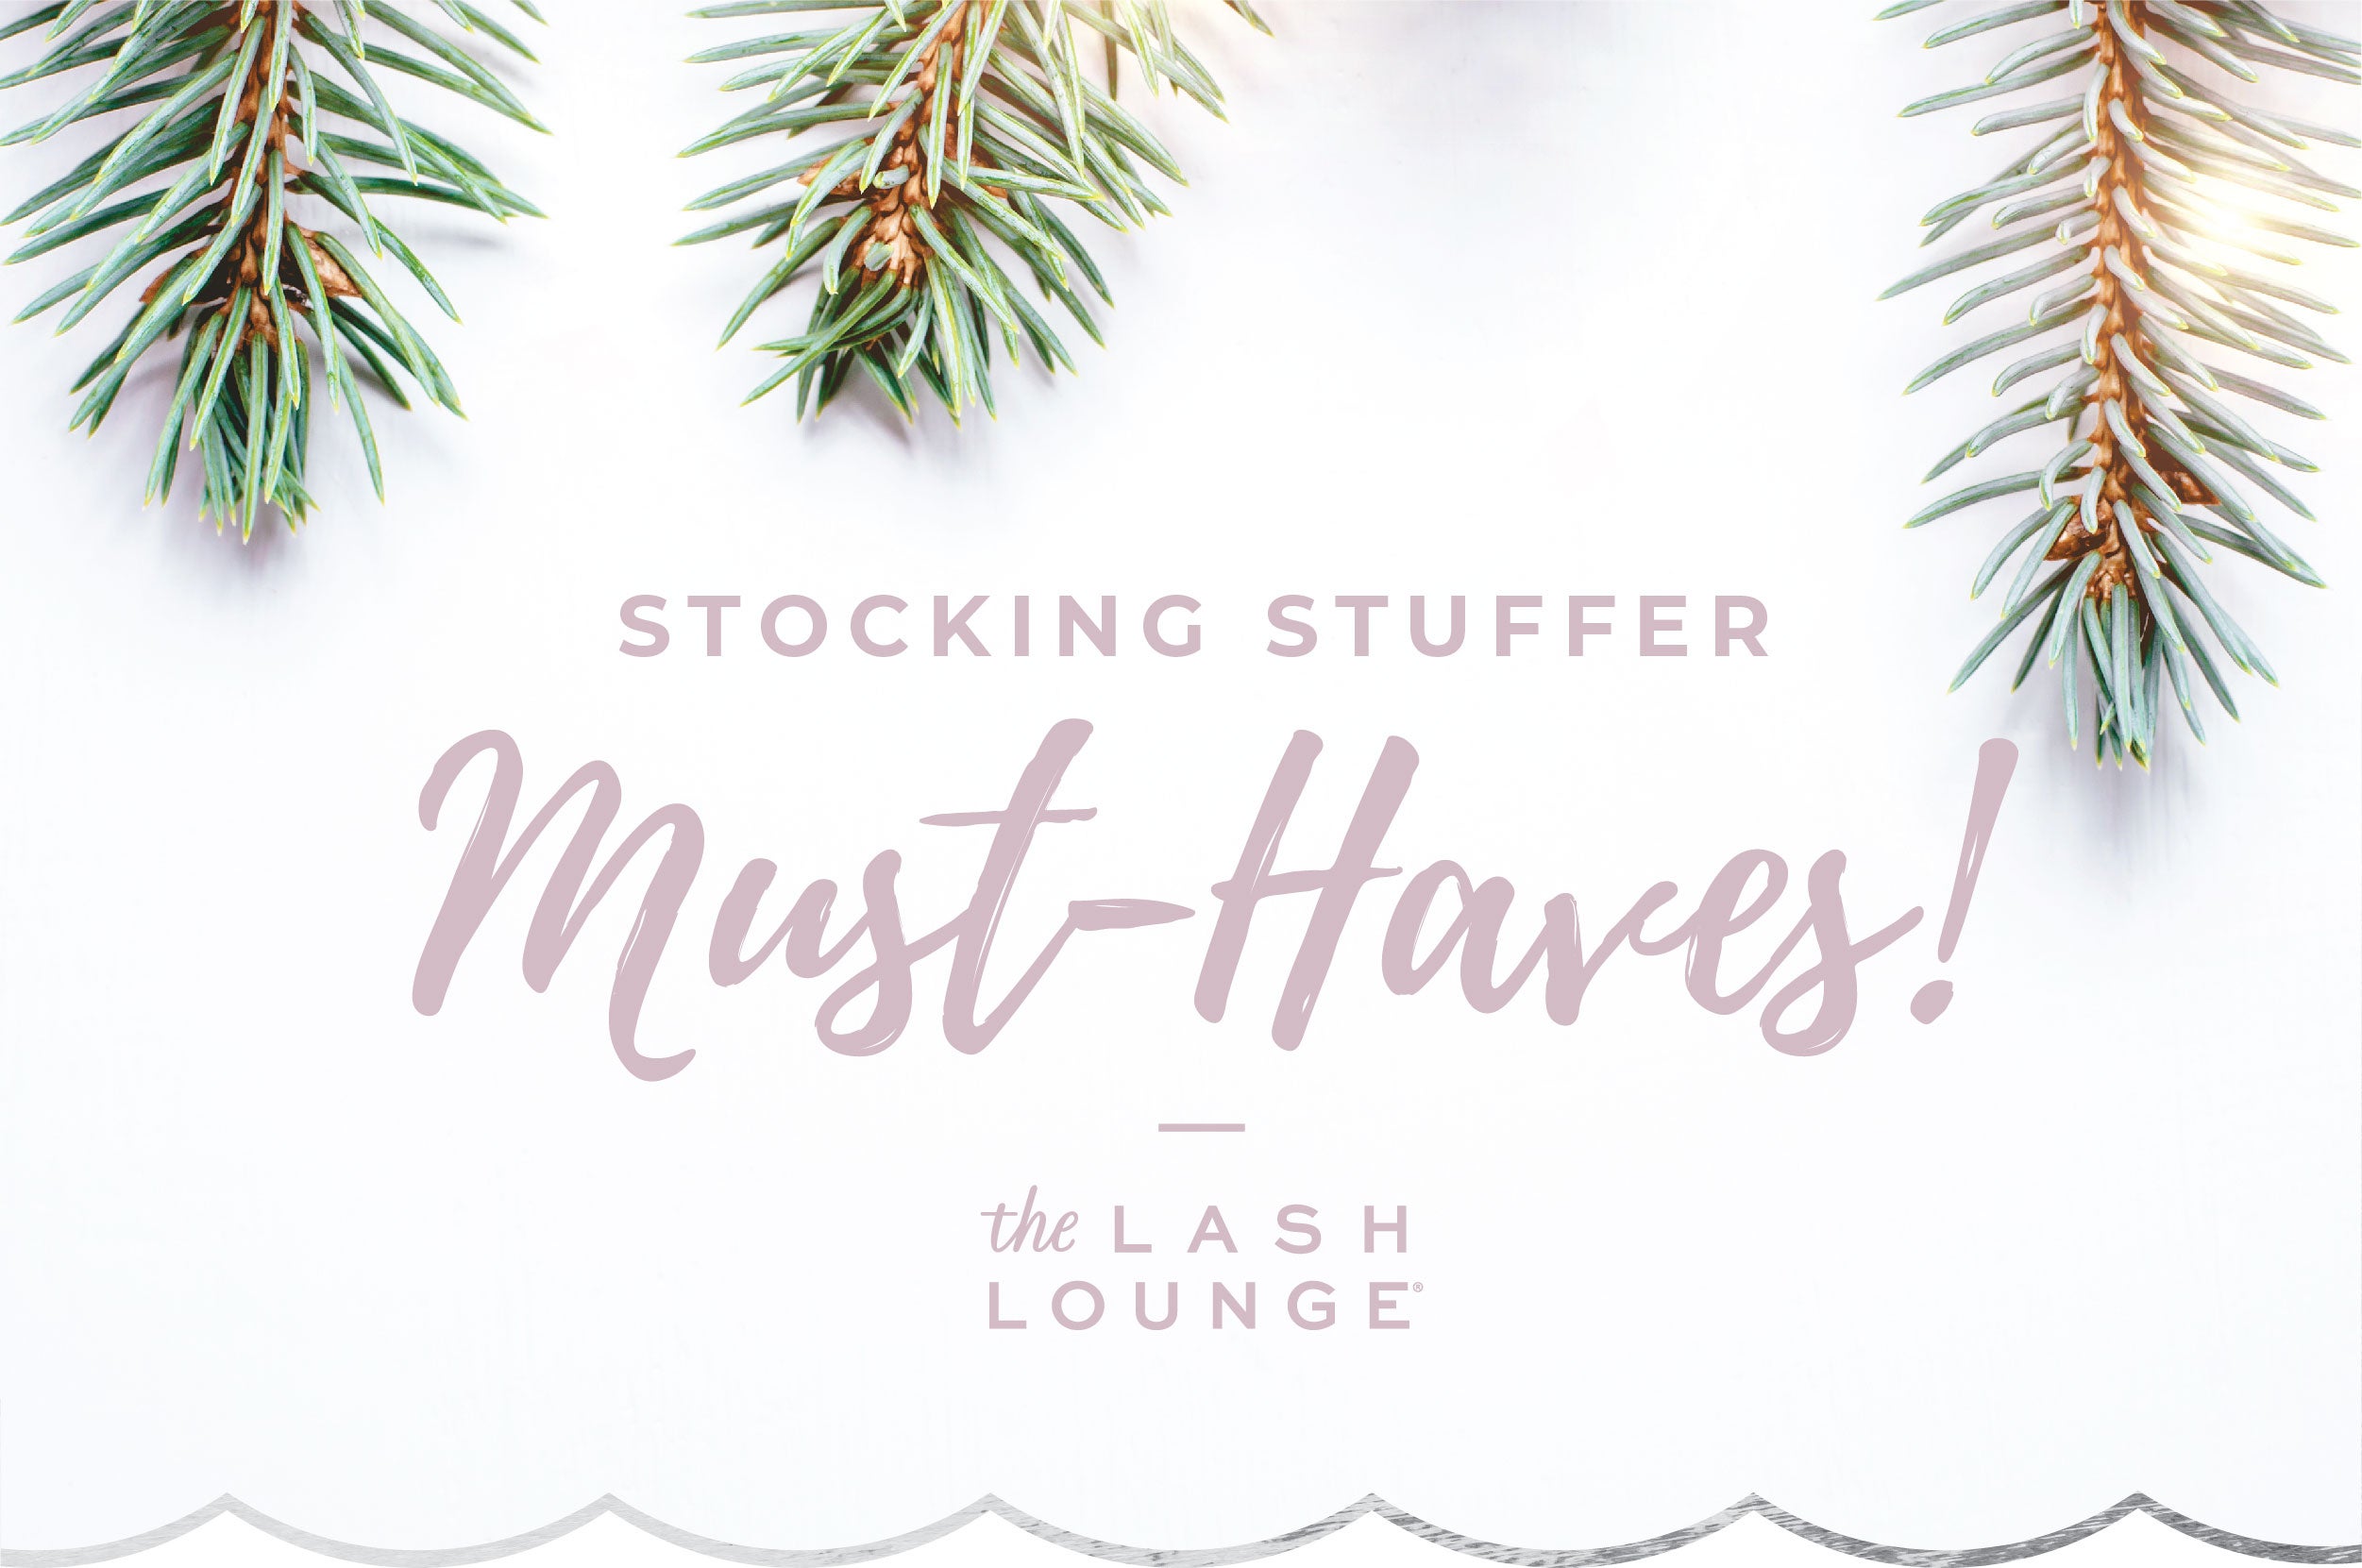 Lash Lounge owners share stocking stuffer must-haves